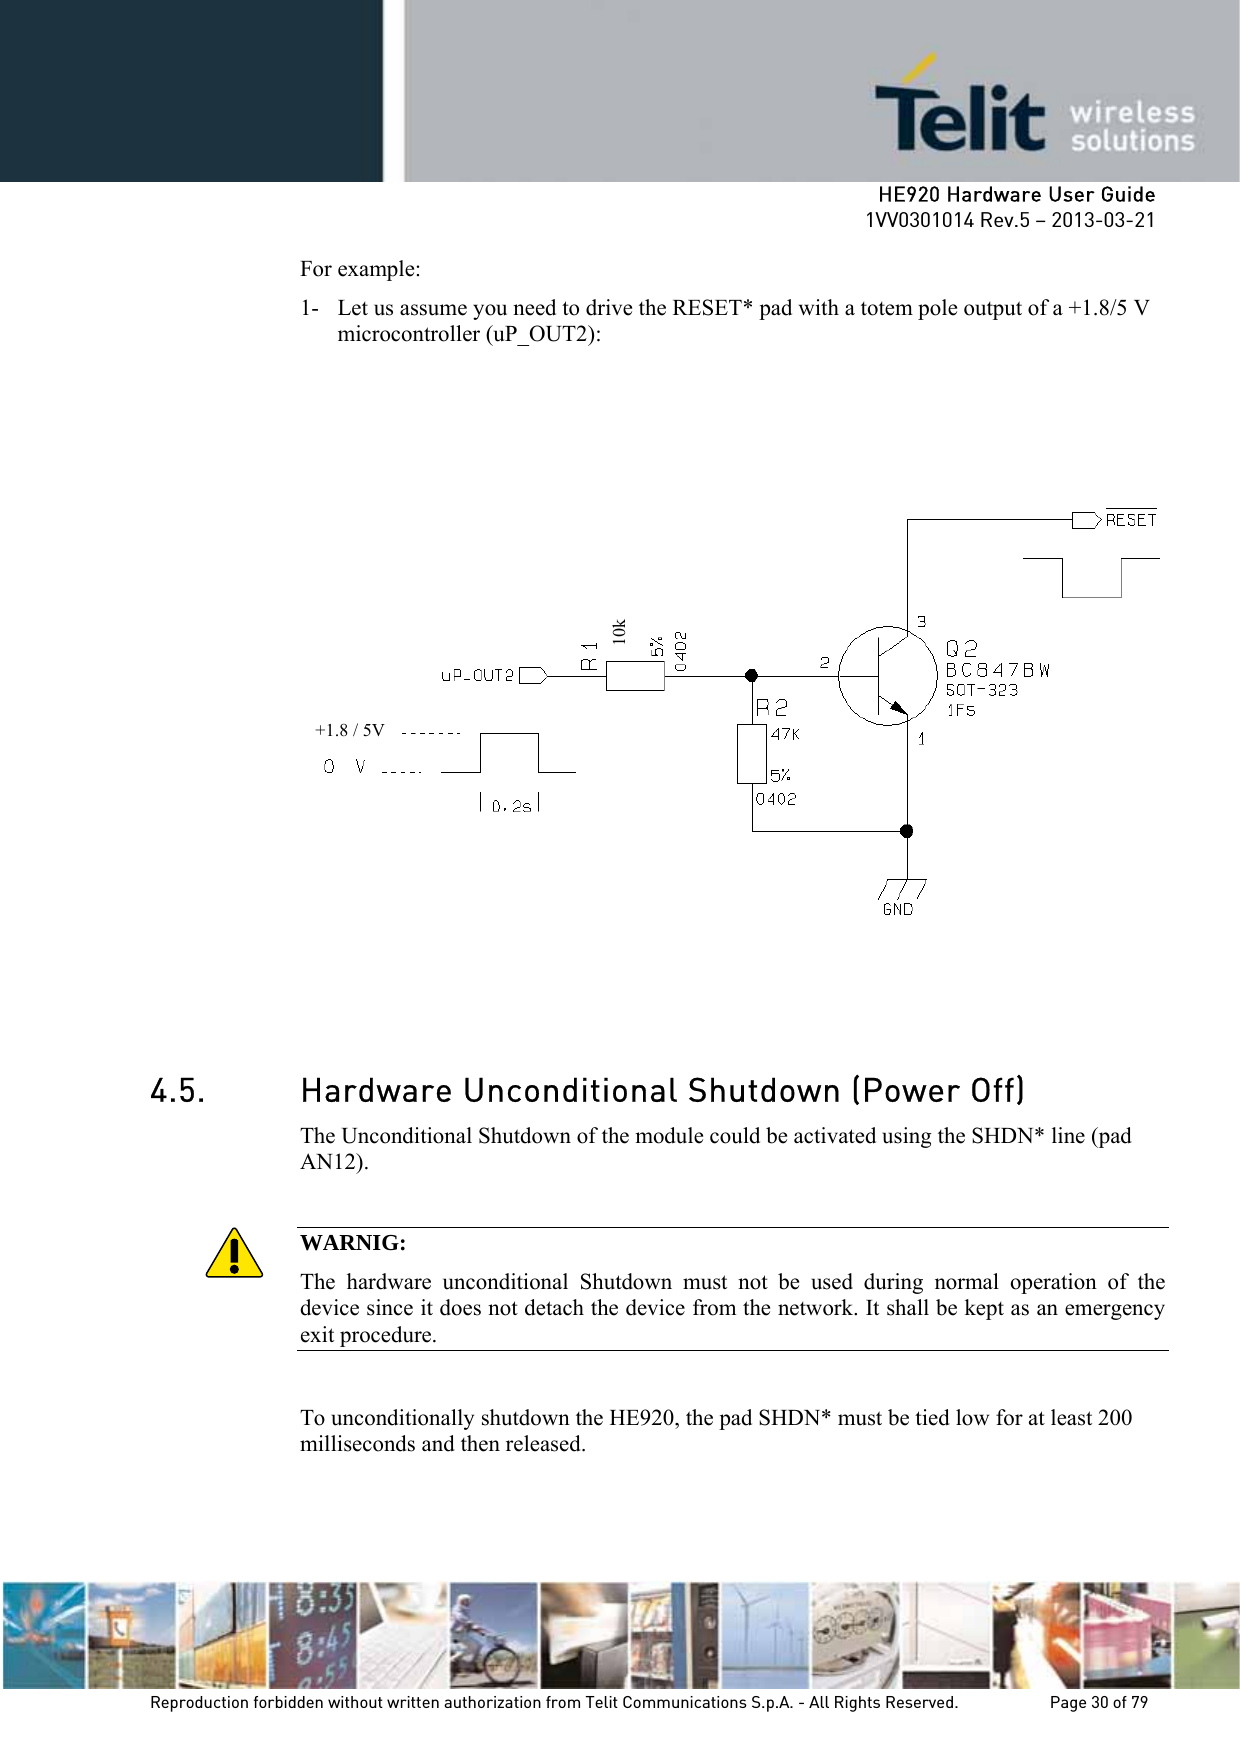     HE920 Hardware User Guide 1VV0301014 Rev.5 – 2013-03-21 Reproduction forbidden without written authorization from Telit Communications S.p.A. - All Rights Reserved.    Page 30 of 79  For example: 1- Let us assume you need to drive the RESET* pad with a totem pole output of a +1.8/5 V microcontroller (uP_OUT2):      4.5. Hardware Unconditional Shutdown (Power Off) The Unconditional Shutdown of the module could be activated using the SHDN* line (pad AN12).  WARNIG: The hardware unconditional Shutdown must not be used during normal operation of the device since it does not detach the device from the network. It shall be kept as an emergency exit procedure.   To unconditionally shutdown the HE920, the pad SHDN* must be tied low for at least 200 milliseconds and then released.   10k +1.8 / 5V 